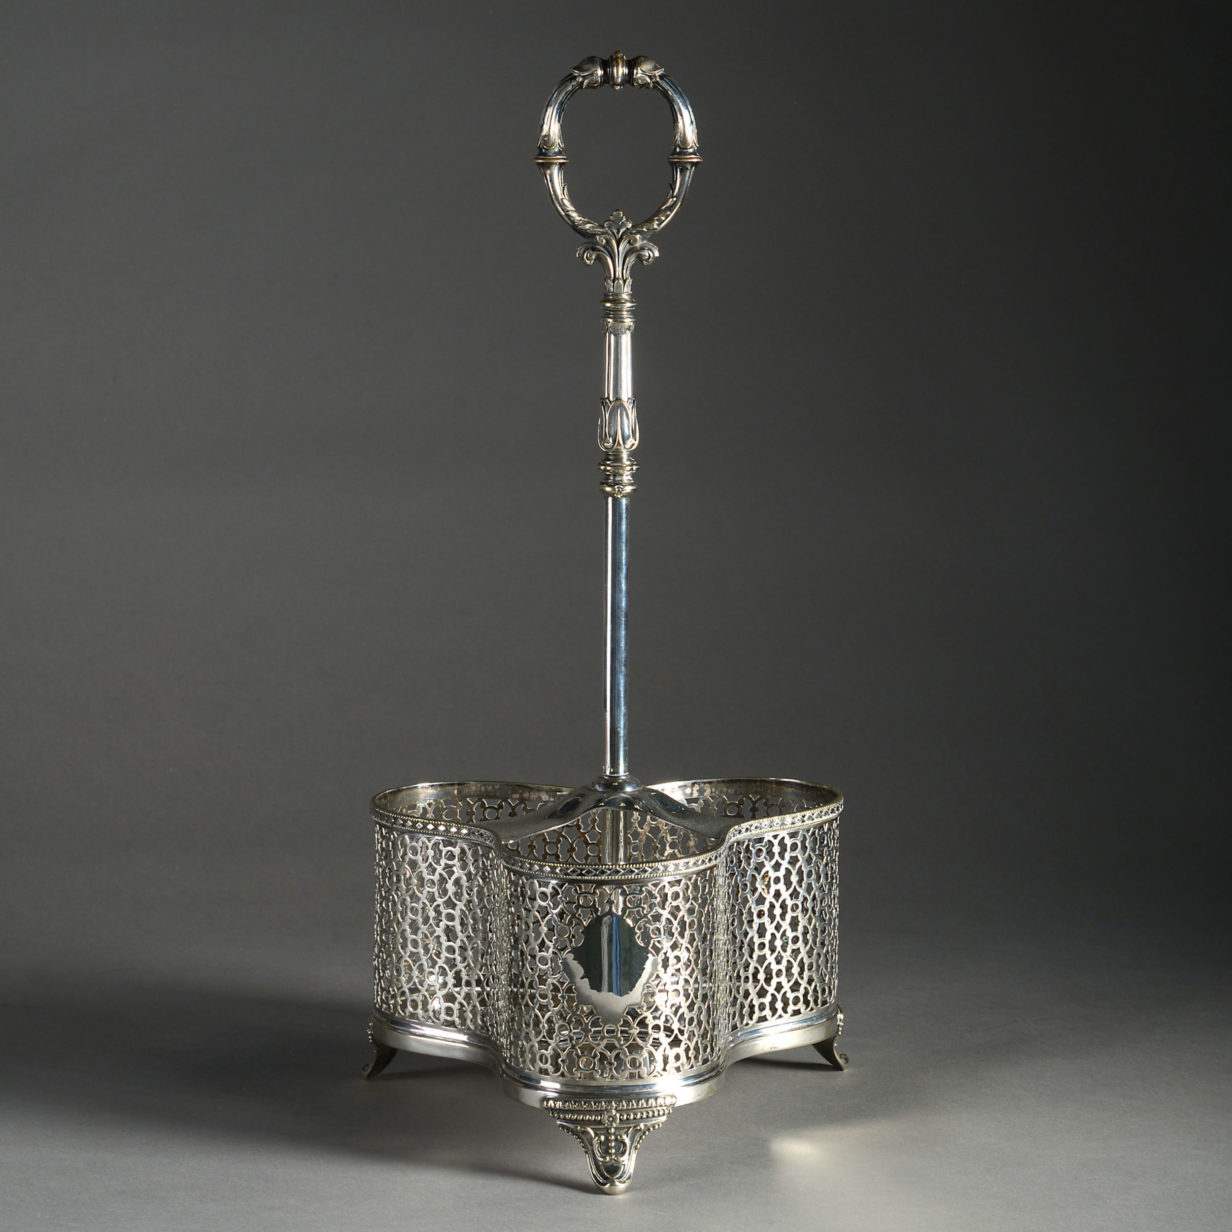 A 19th Century Silvered Bottle Carrier and Three Coloured Glass Cordial Bottles with a Silvered Carrier.